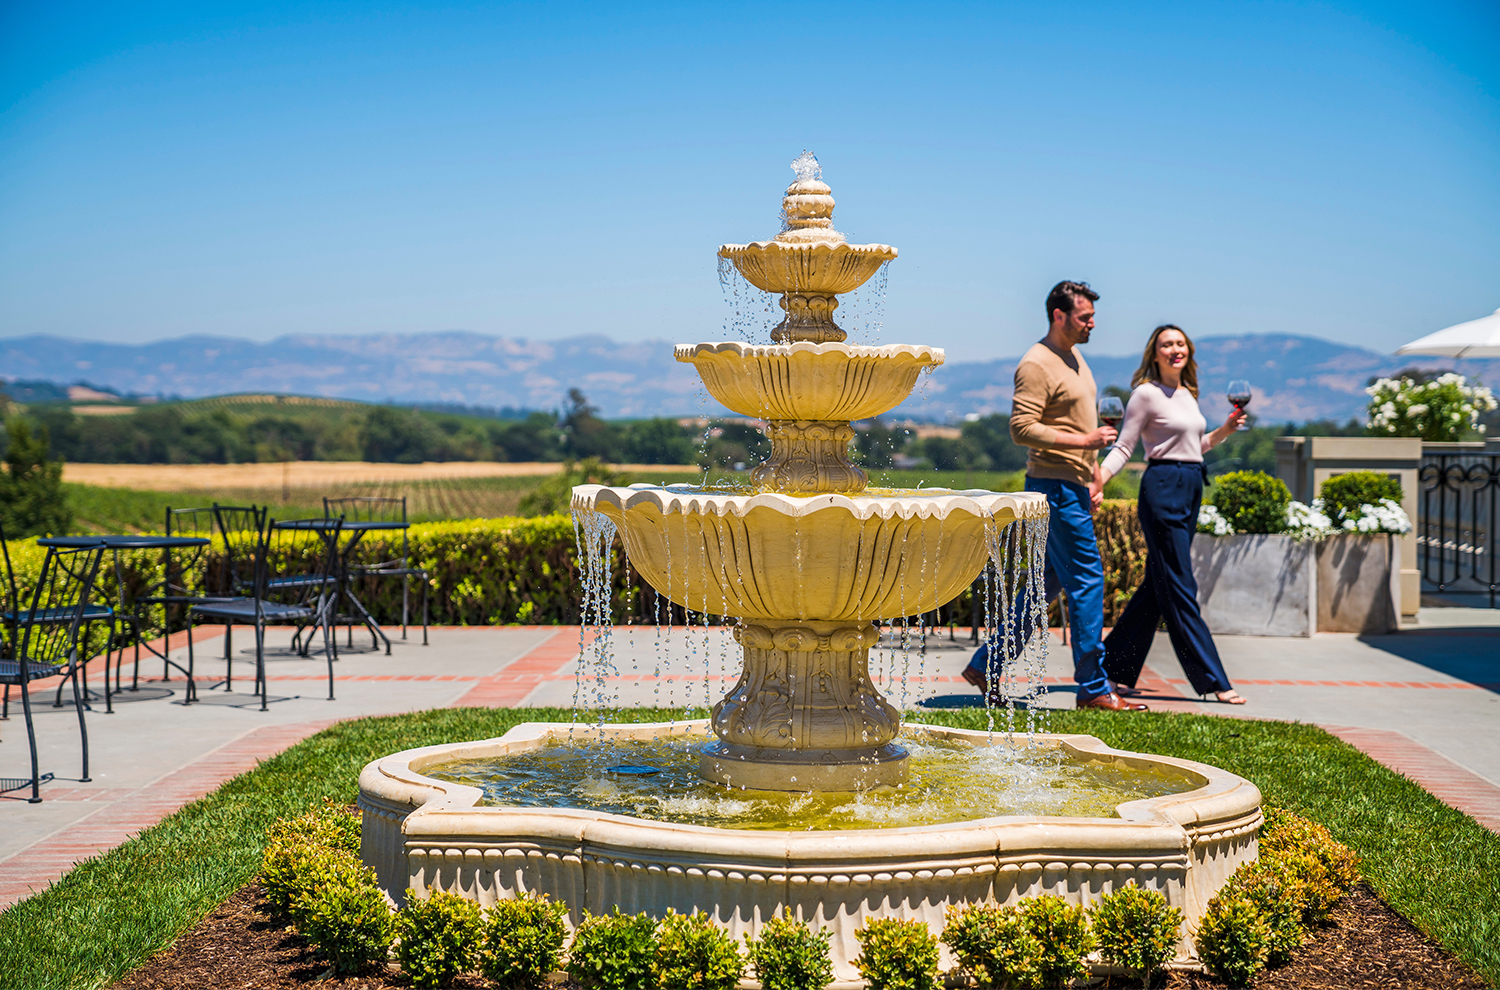 domaine carneros winery tour